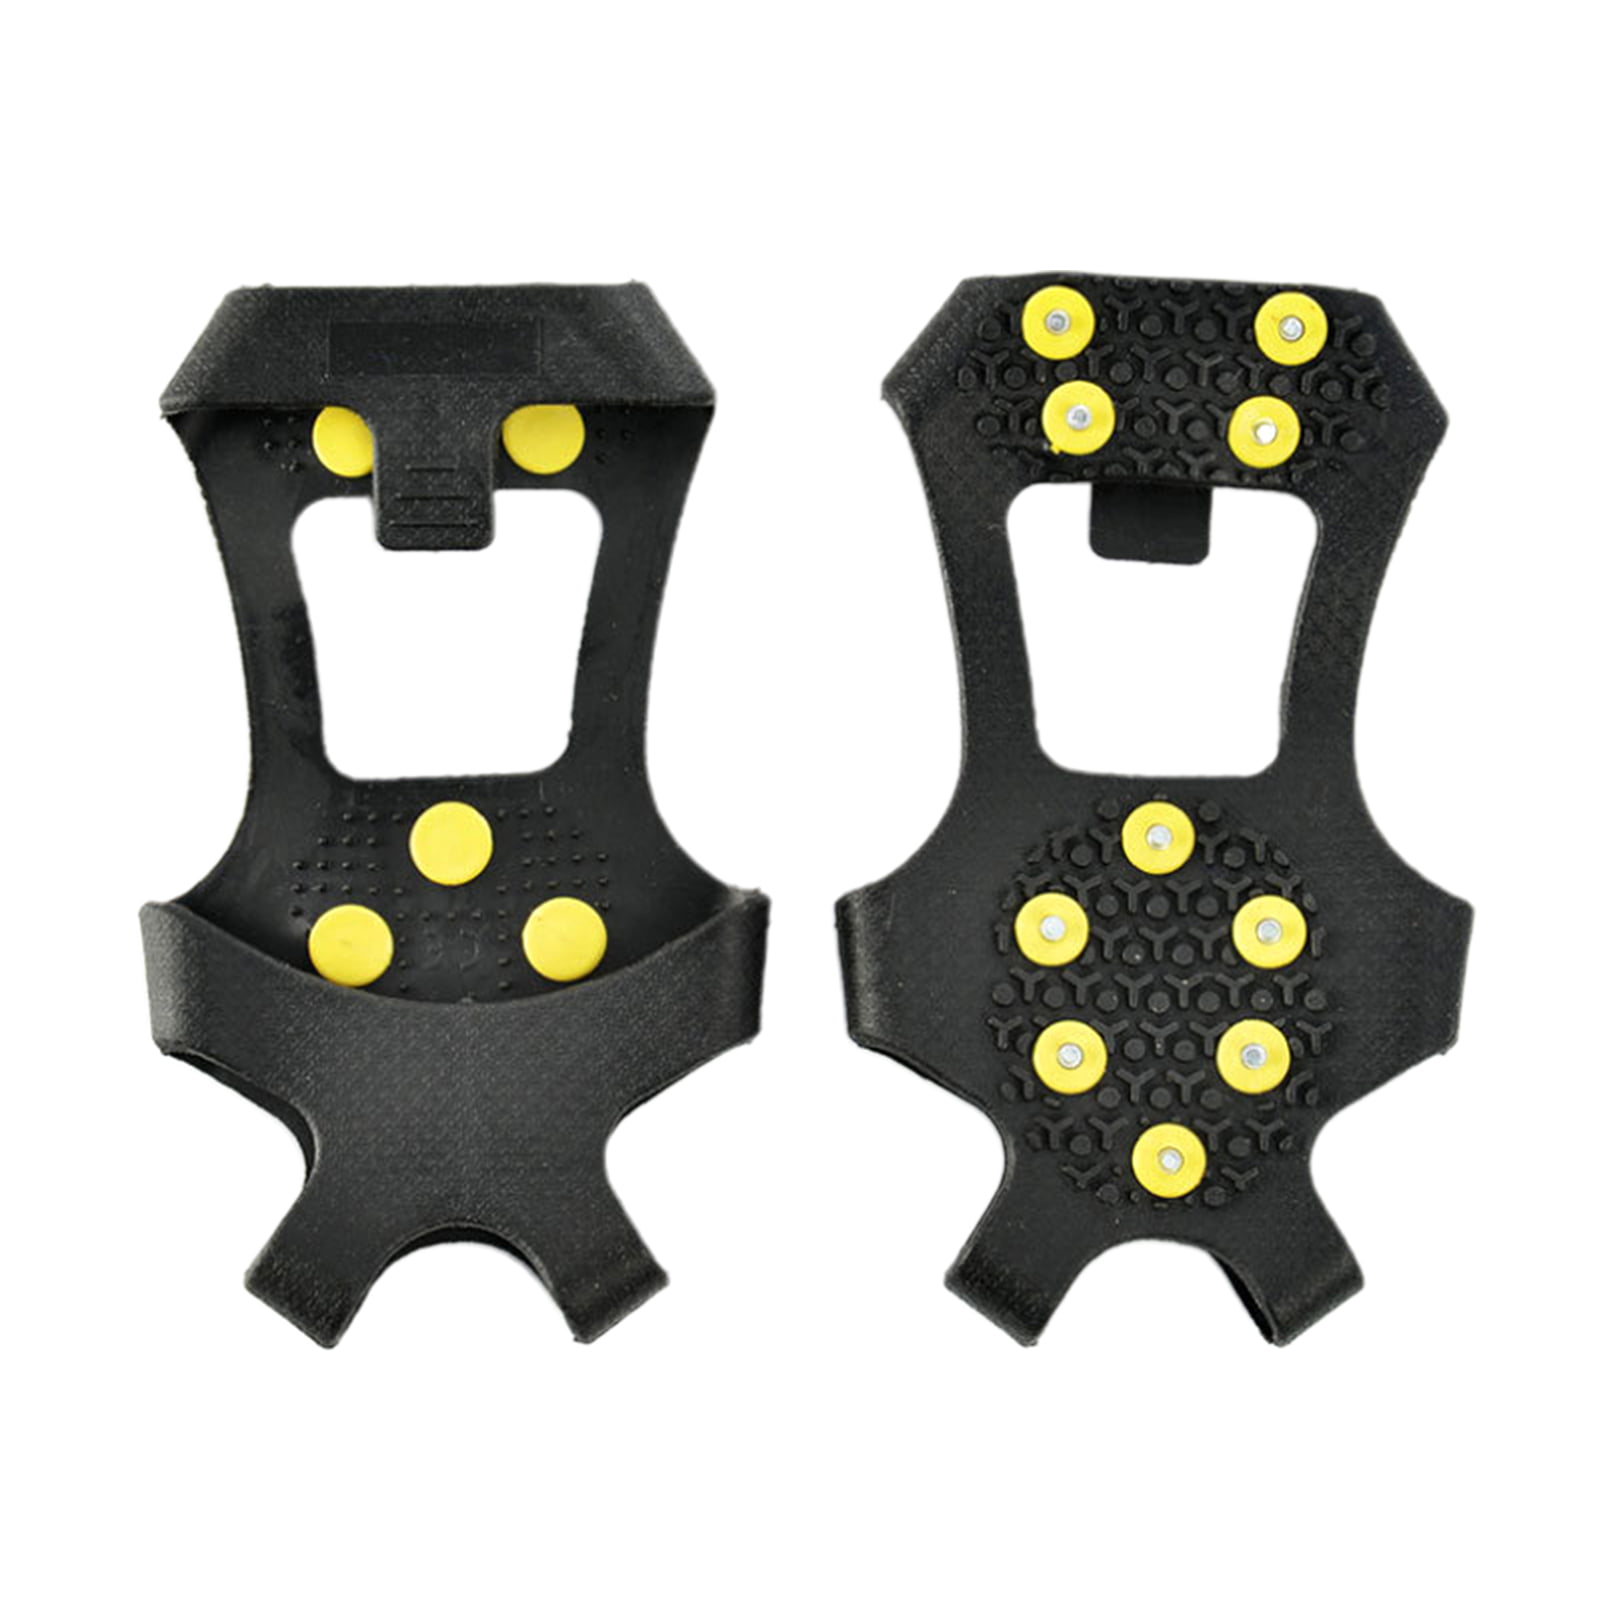 Details about   Climbing Walking Shoes 1 Pair Anti Skid Spike Grip Outdoor Equipment Supplies 